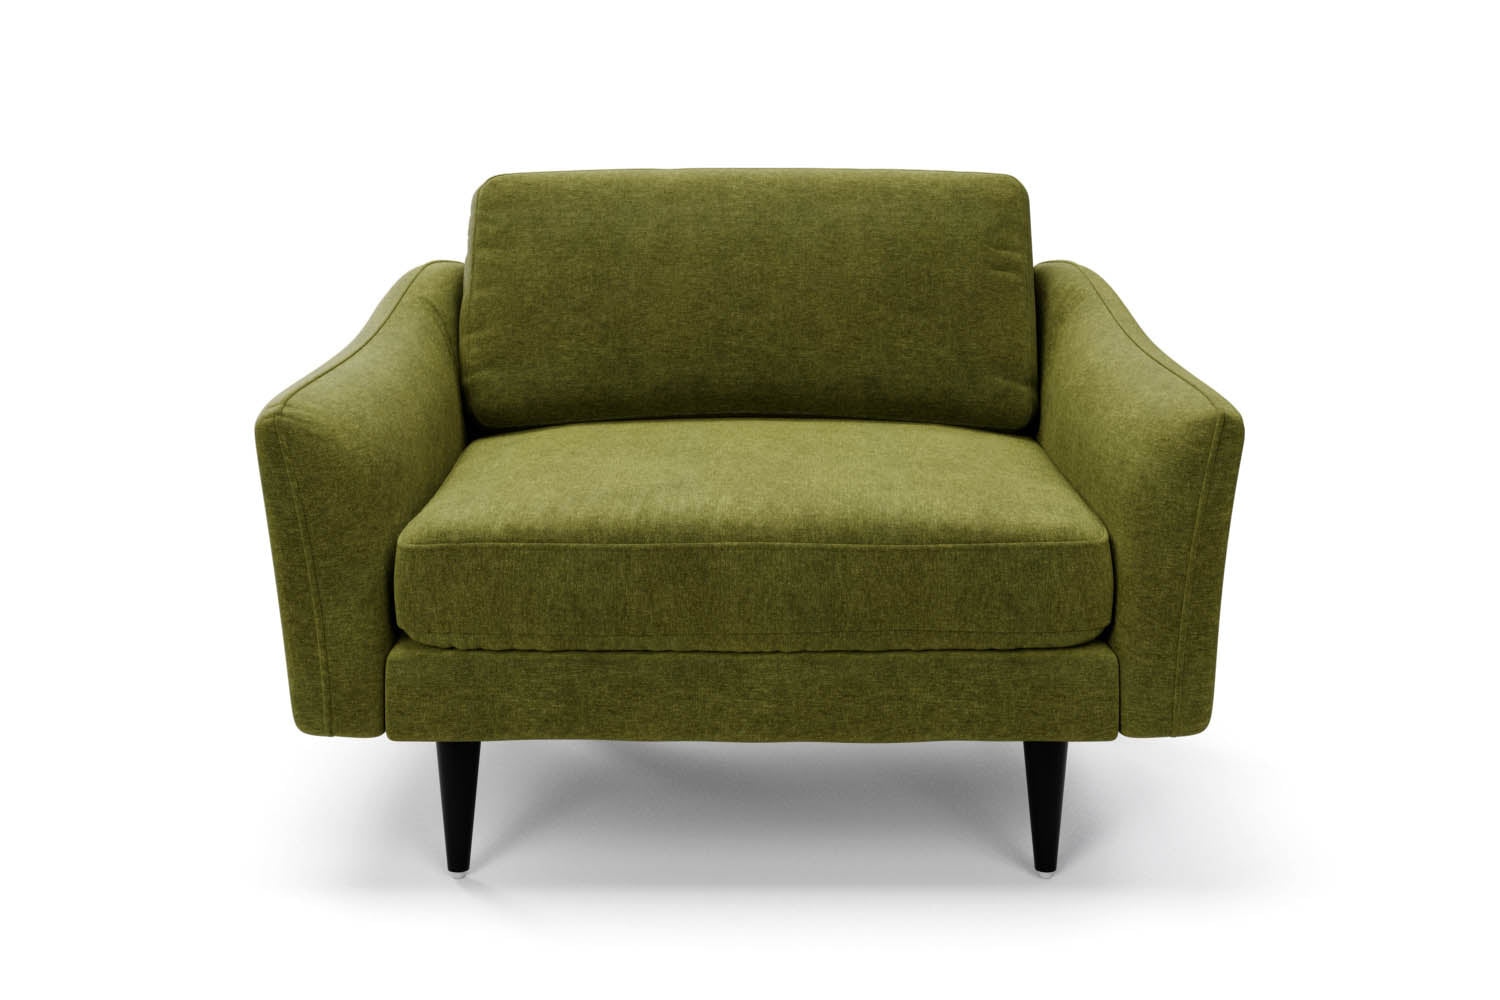 The Rebel Snuggler Sofa in Moss with black legs front variant_40886297165872